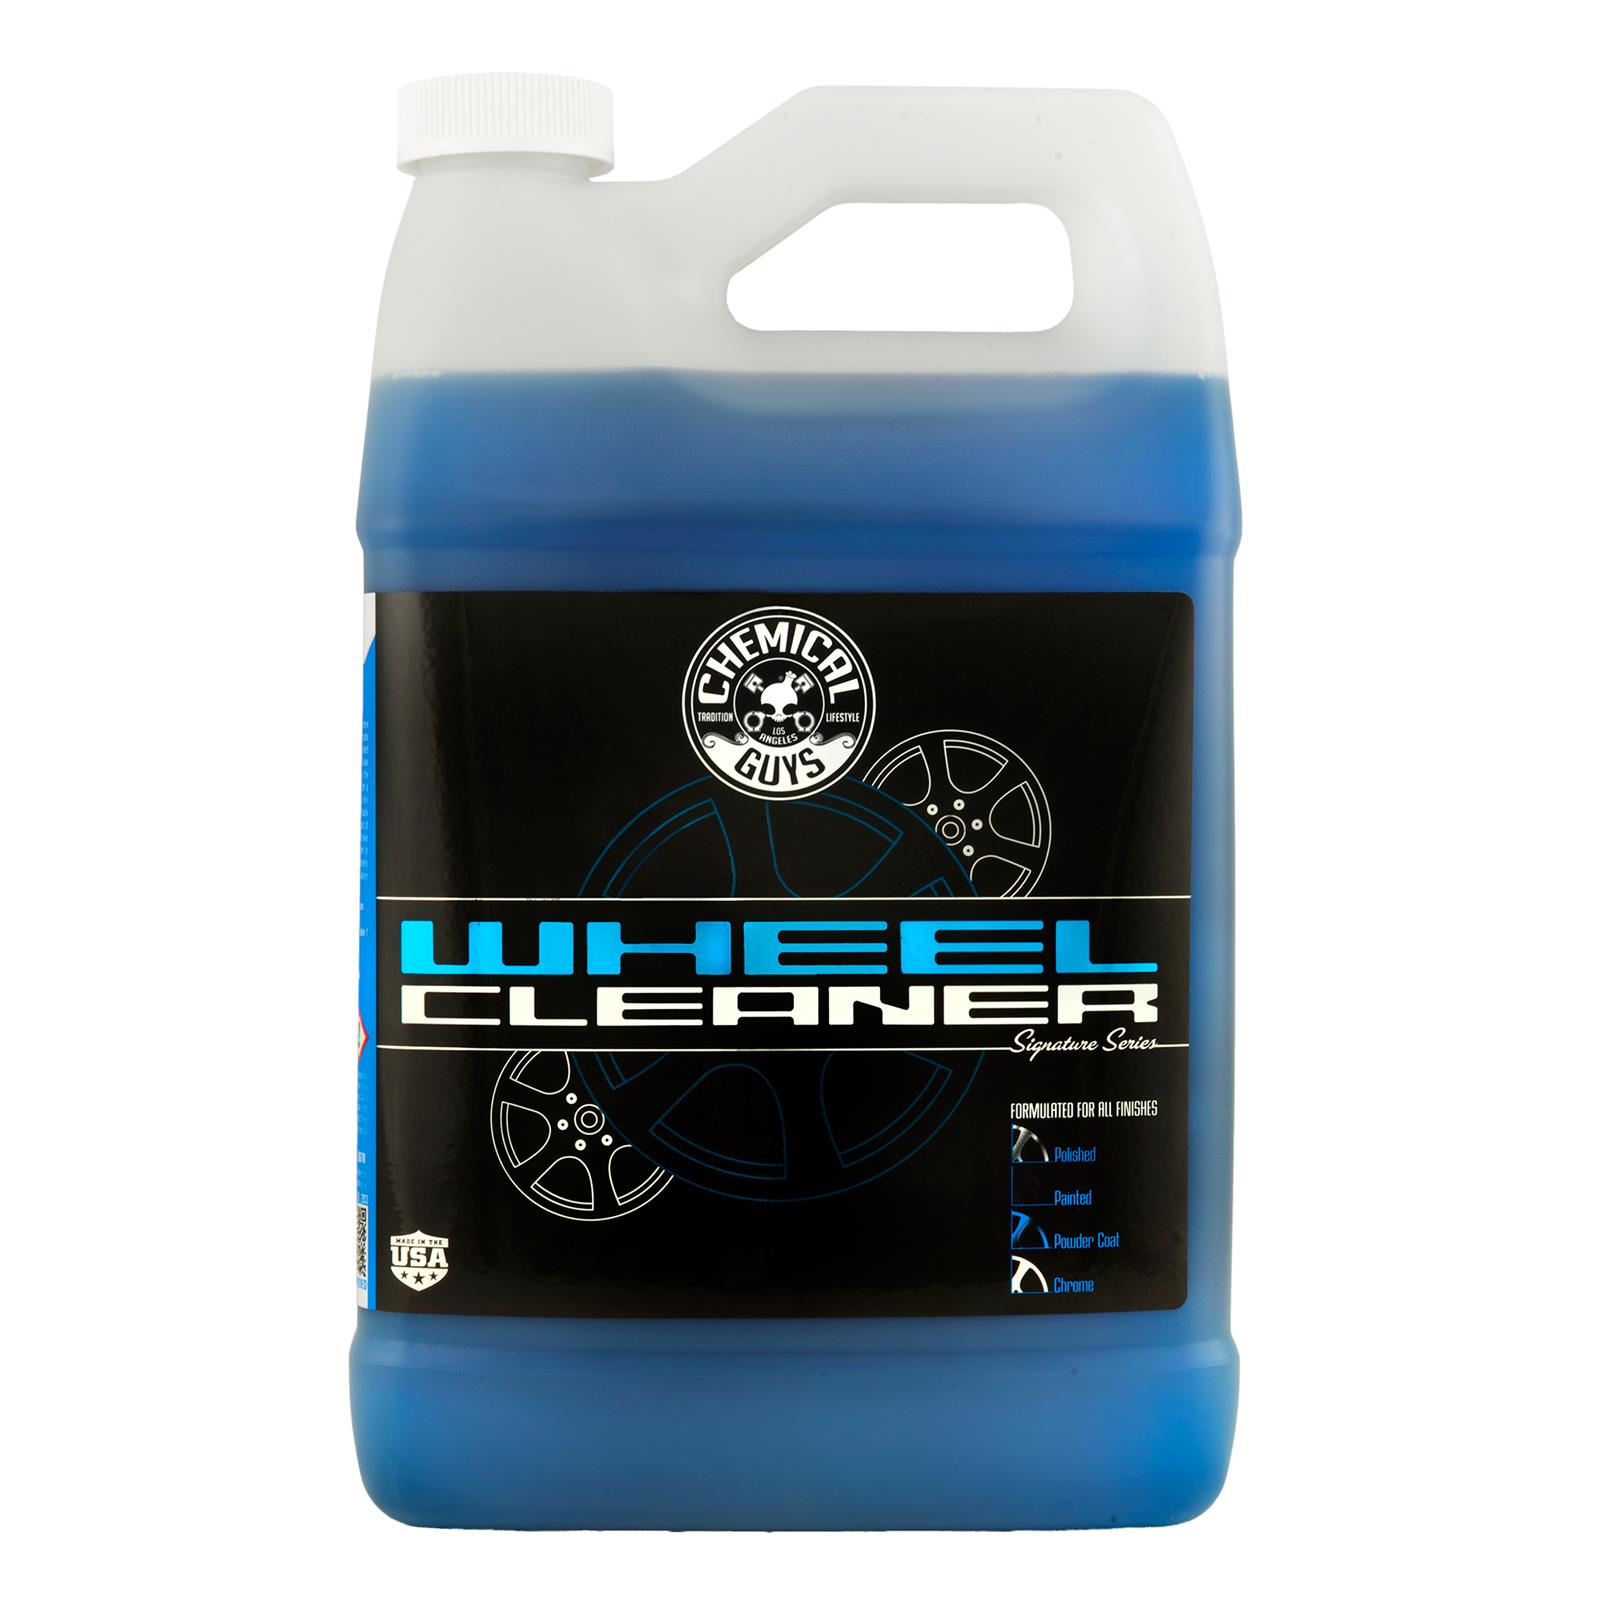 Chemical Guys CLD_203 Chemical Guys Signature Series Wheel Cleaner